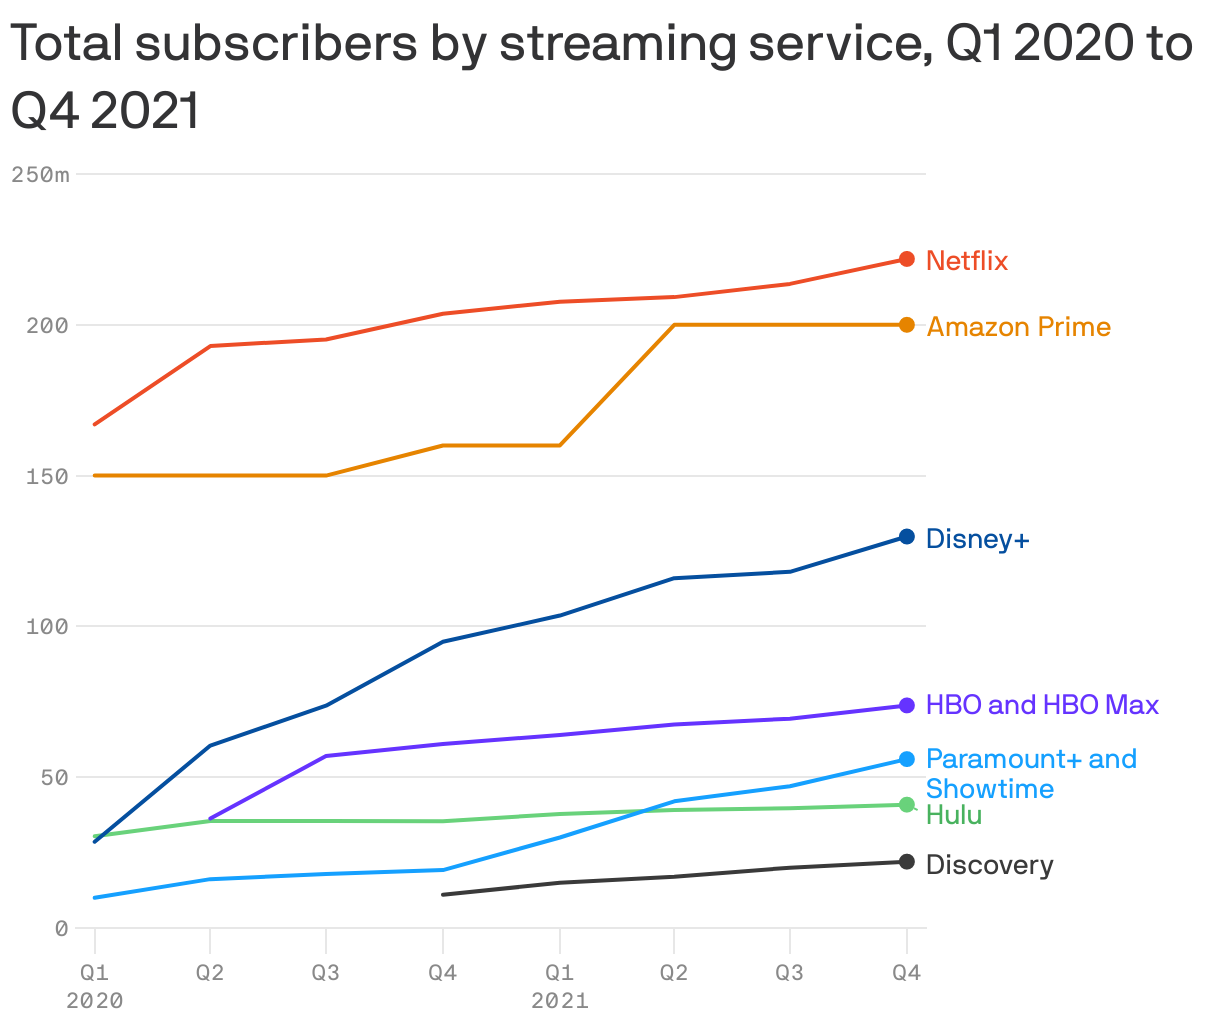 Total subscribers by streaming service, Q1 2020 to Q4 2021